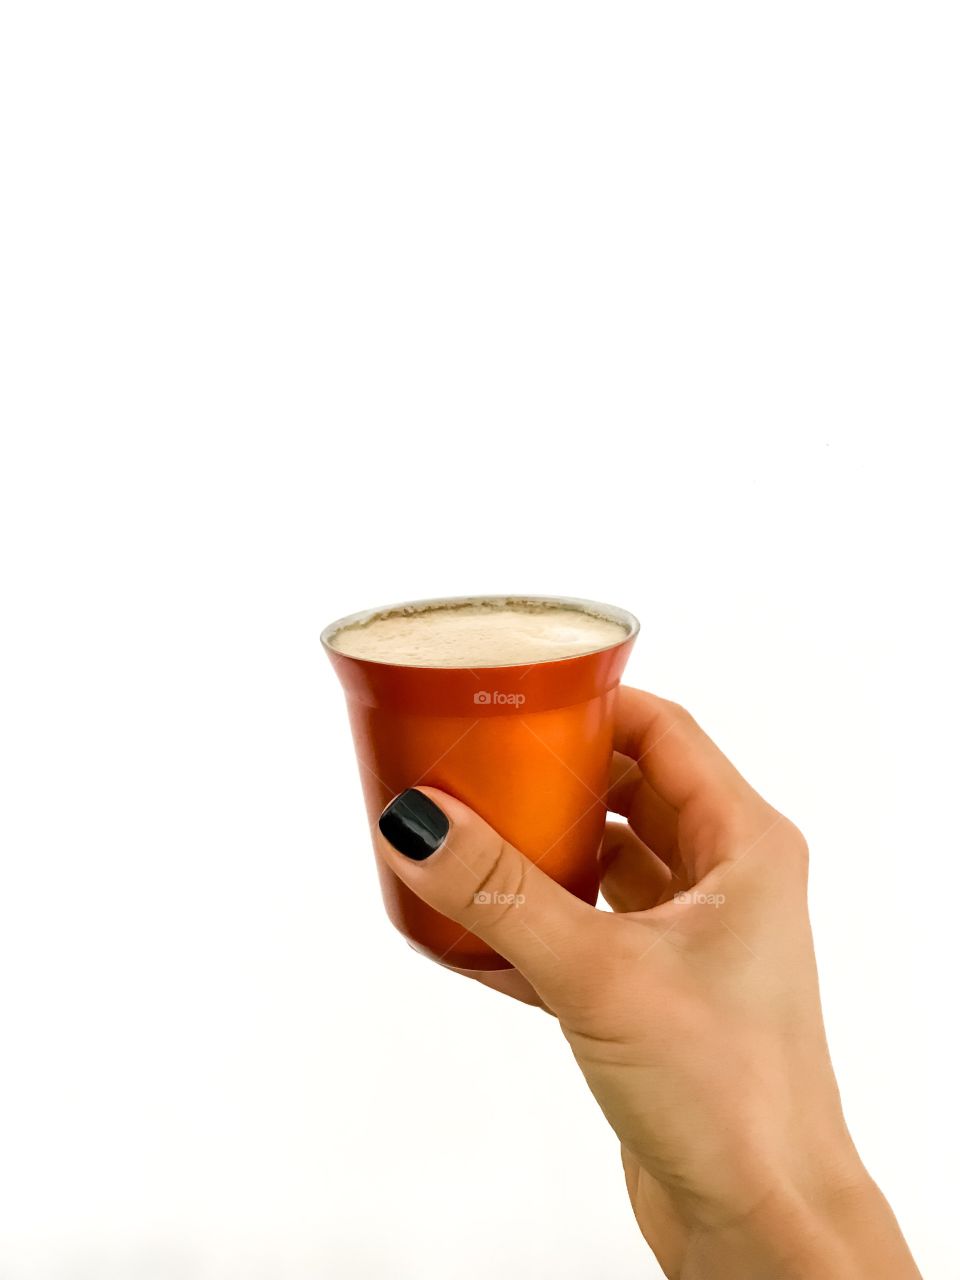 Nespresso moments: a hand holding a cup of morning coffee 